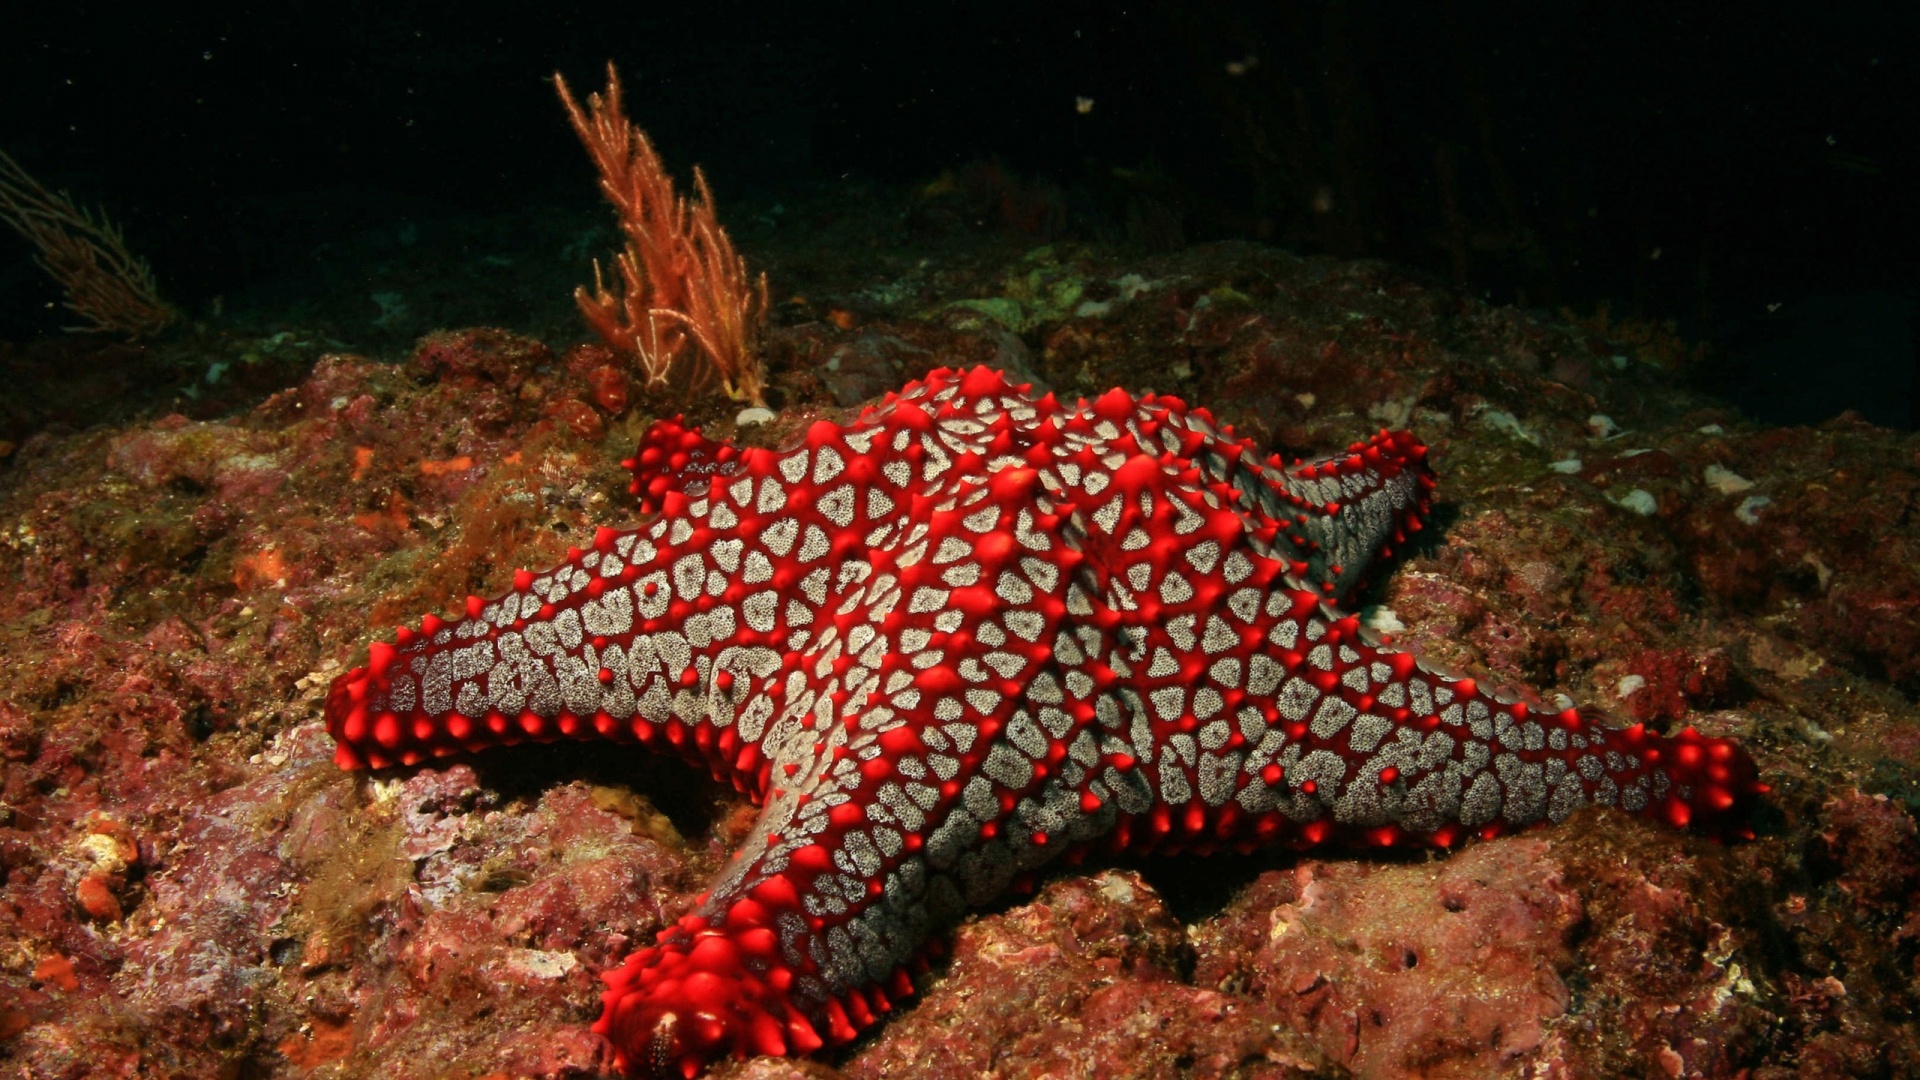 Sea Star: Marine animals that cannot survive in fresh water. 1920x1080 Full HD Wallpaper.